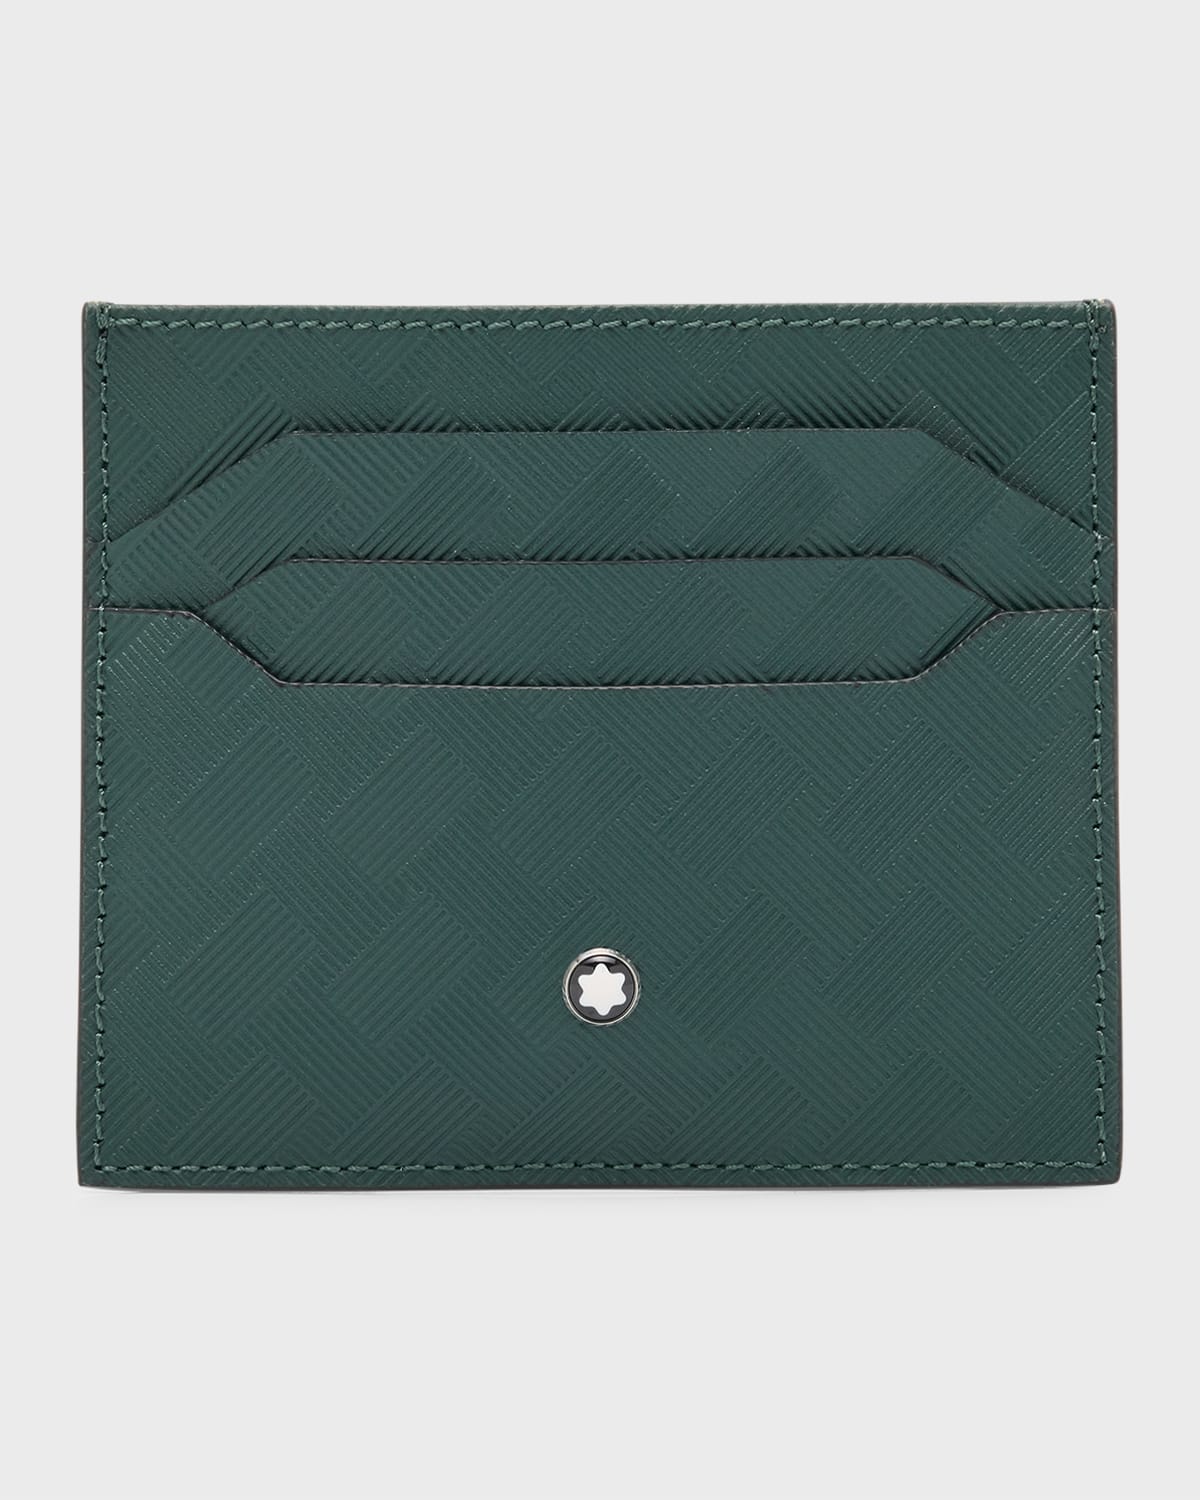 Montblanc Men's Extreme 3.0 Leather Card Holder In Green